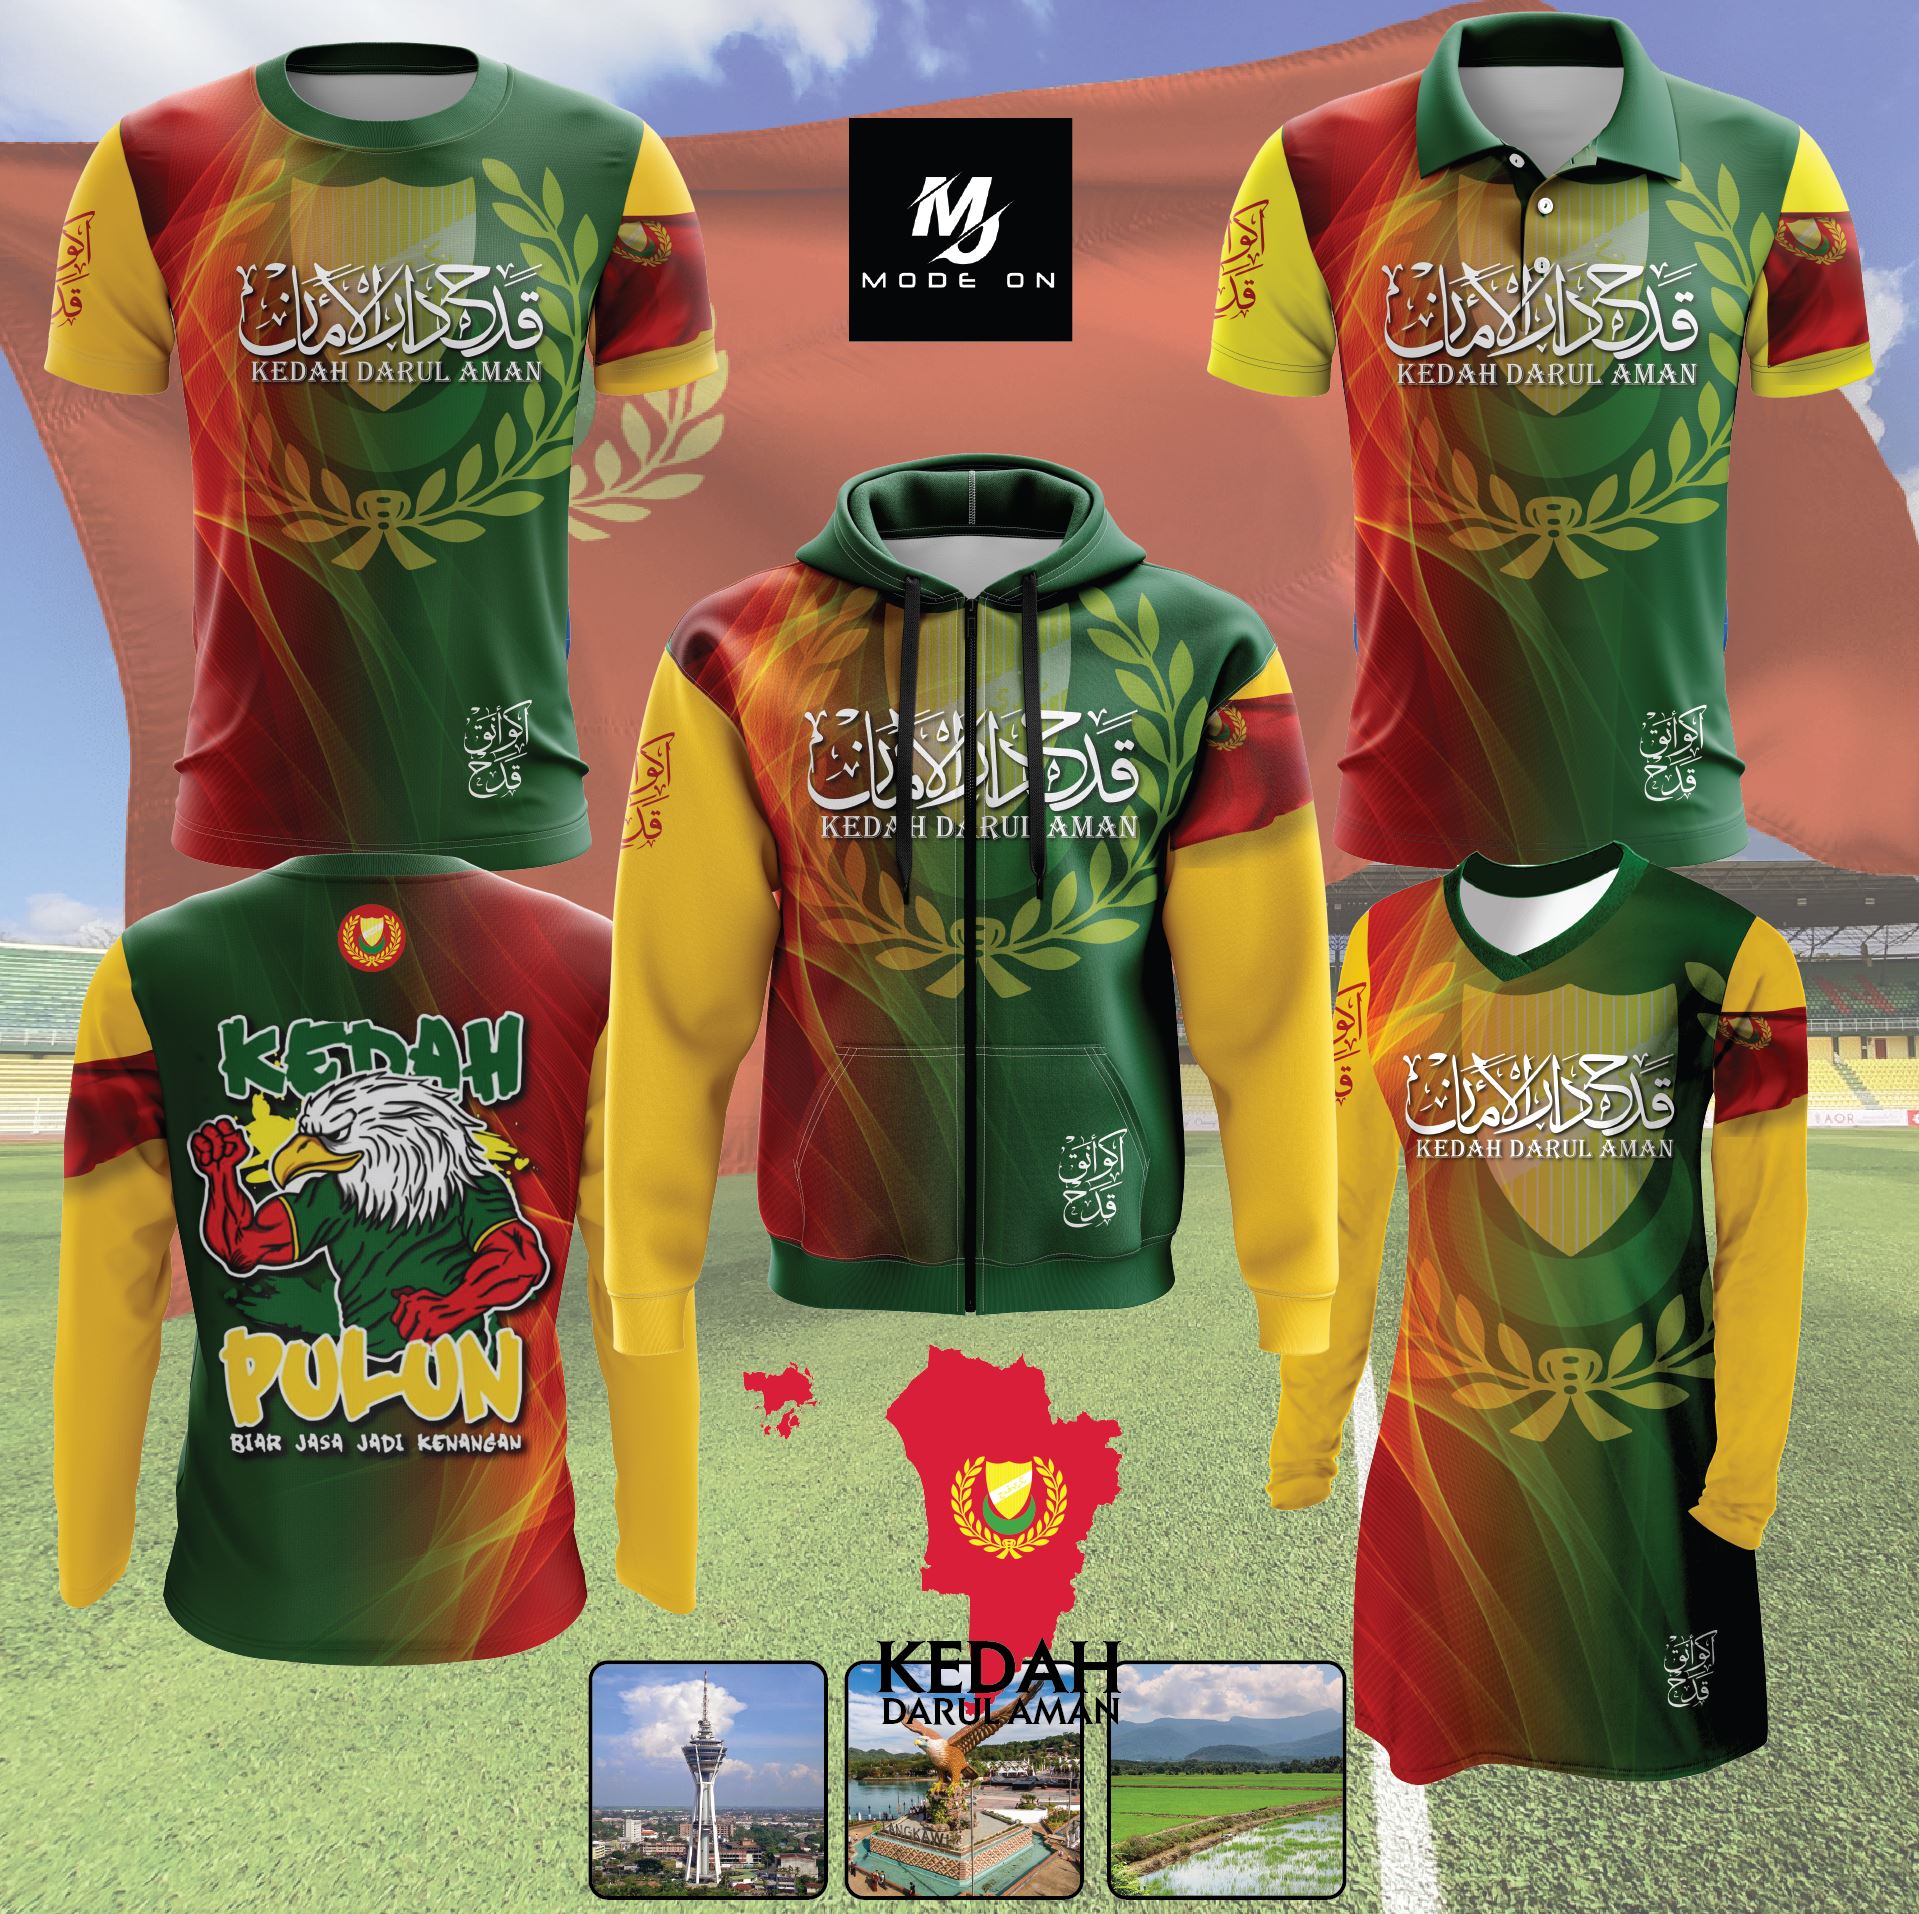 Limited Edition KedahJersey and Jacket #01